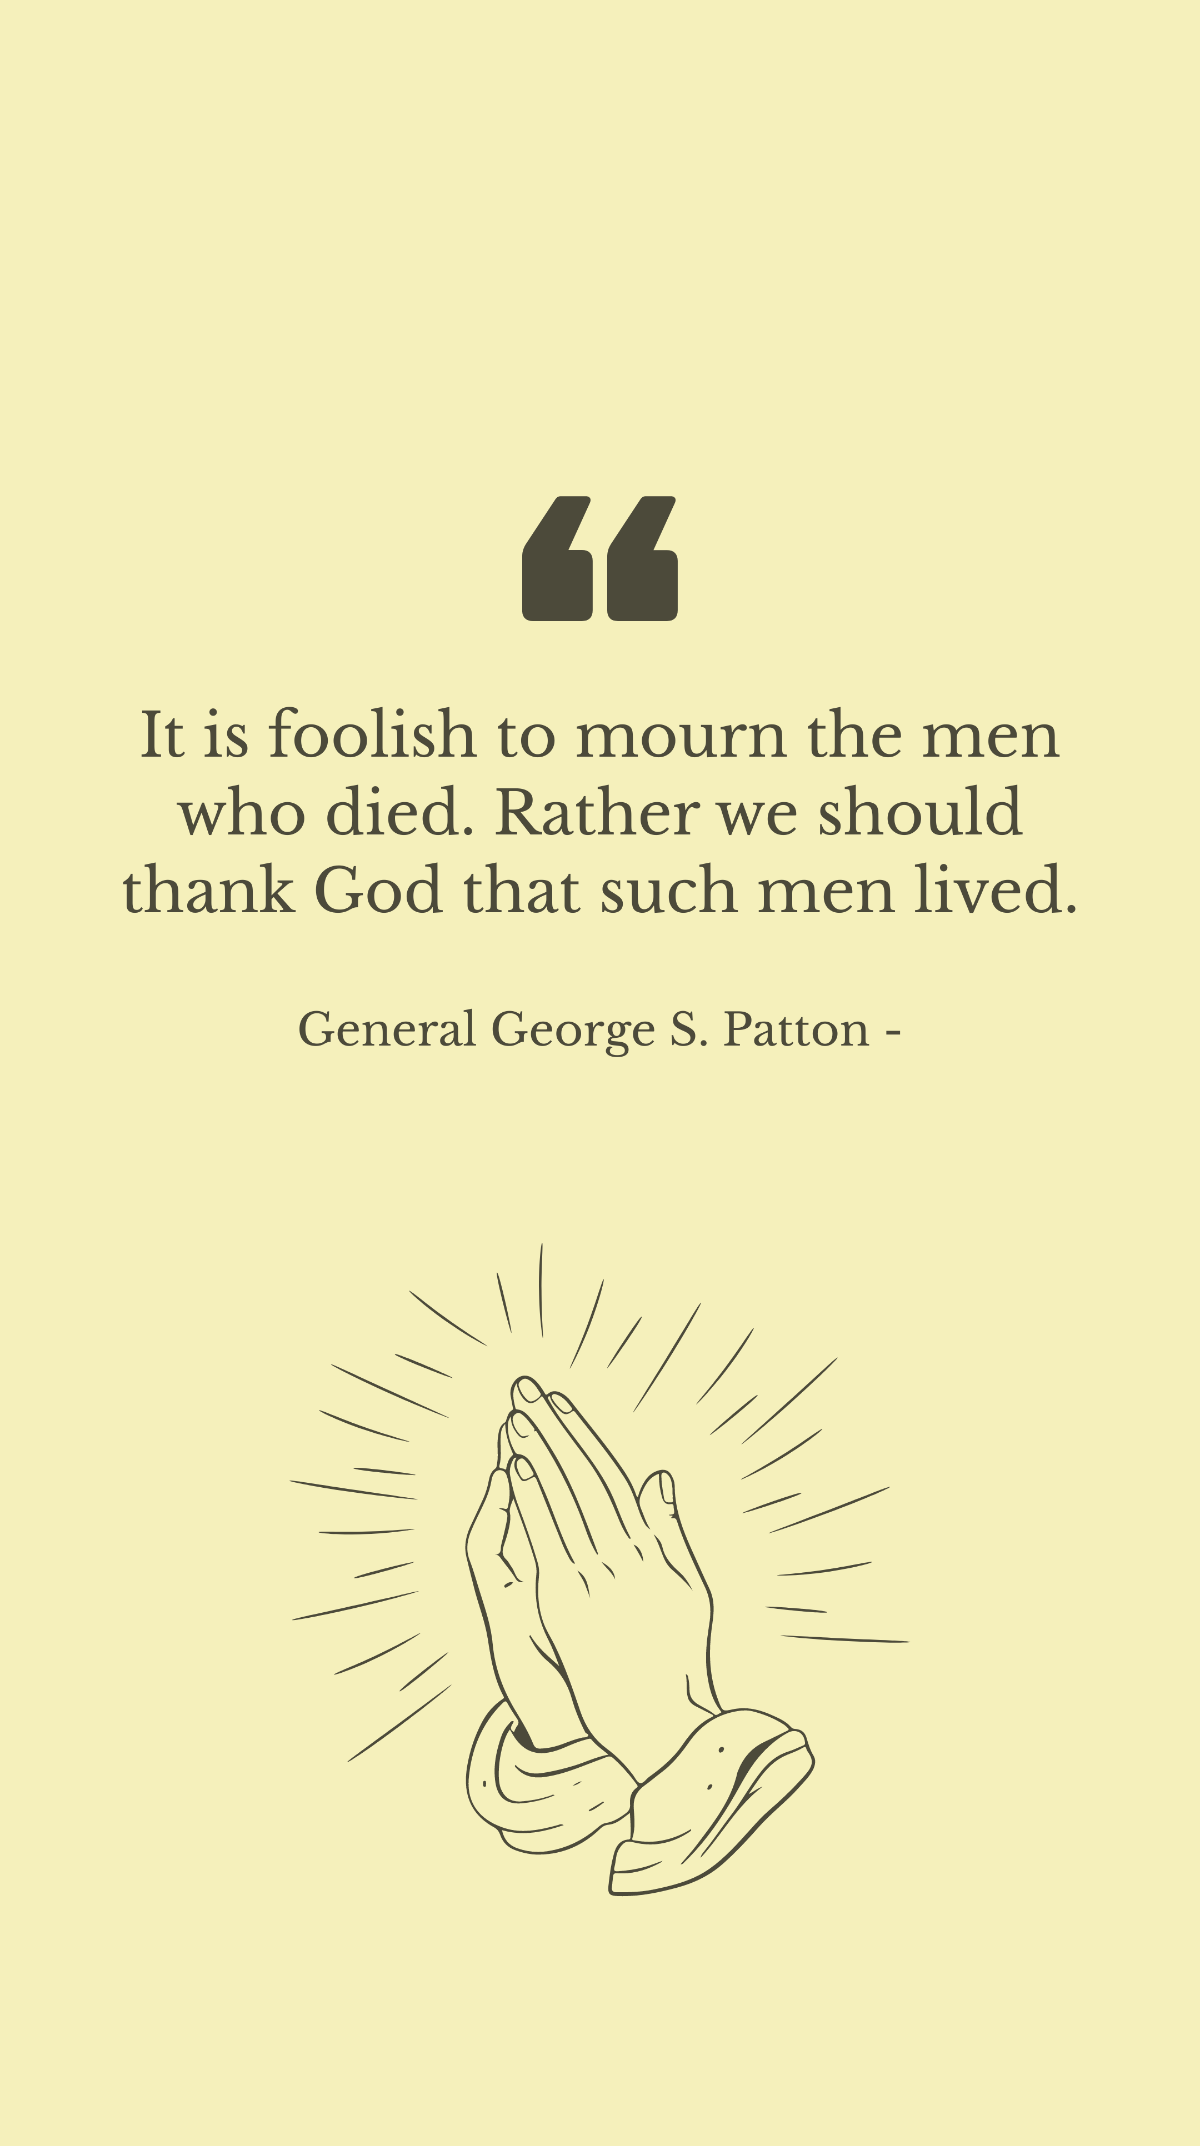 Free General George S. Patton - It is foolish to mourn the men who died. Rather we should thank God that such men lived. Template